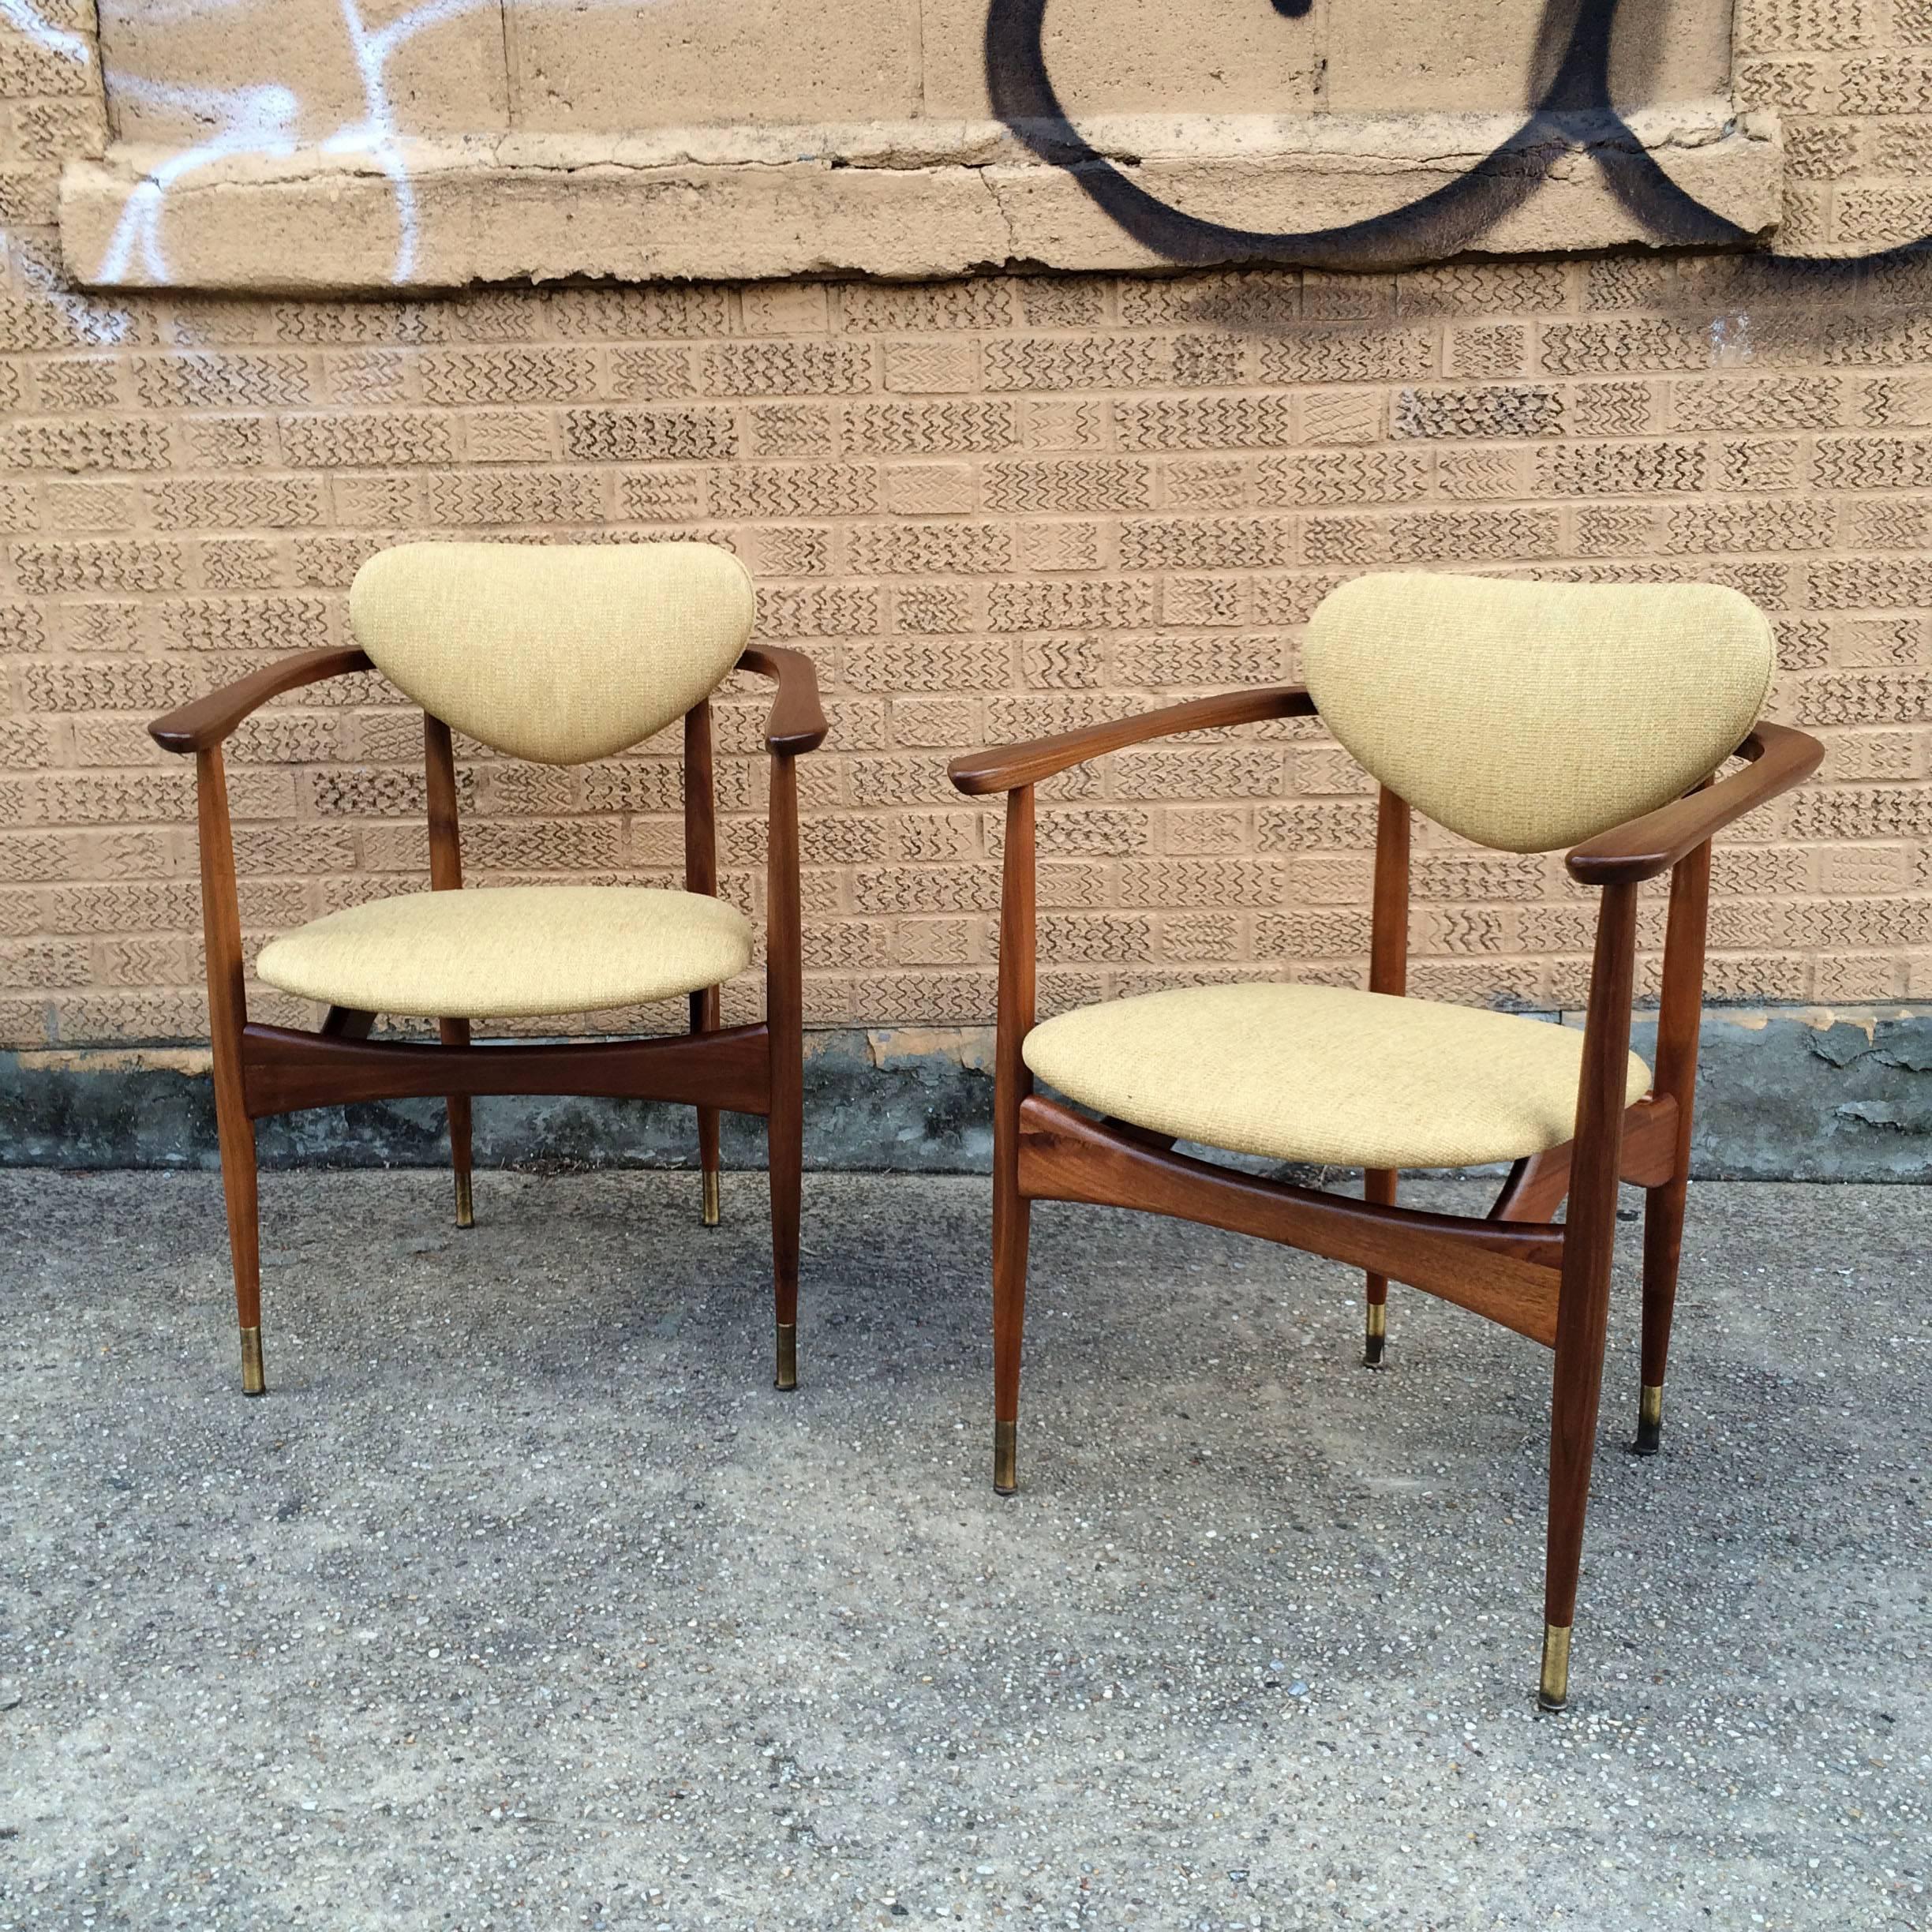 Pair of striking Mid-Century Modern armchairs in the manner of Finn Juhl with walnut frames, newly upholstered seats and backs and brass gliders.